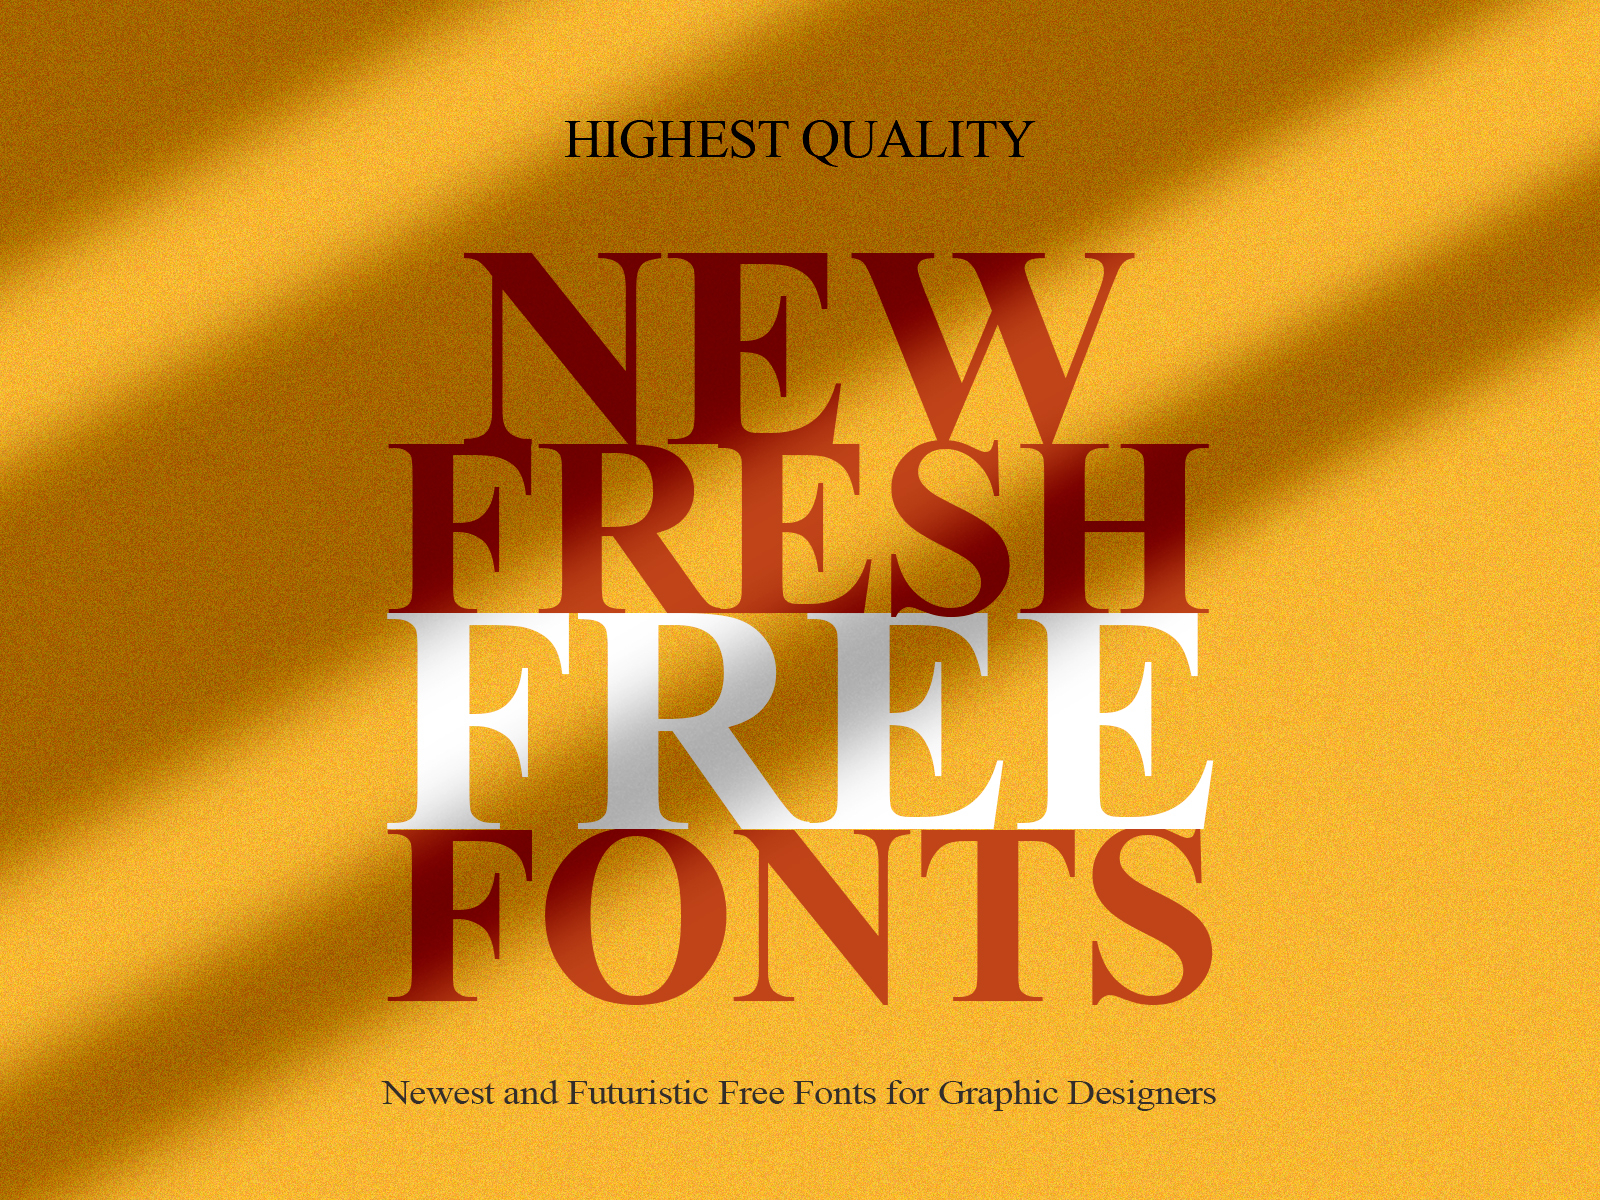 Fonts: 21 New Free Fonts For 2022 by Graphic Design Junction on Dribbble